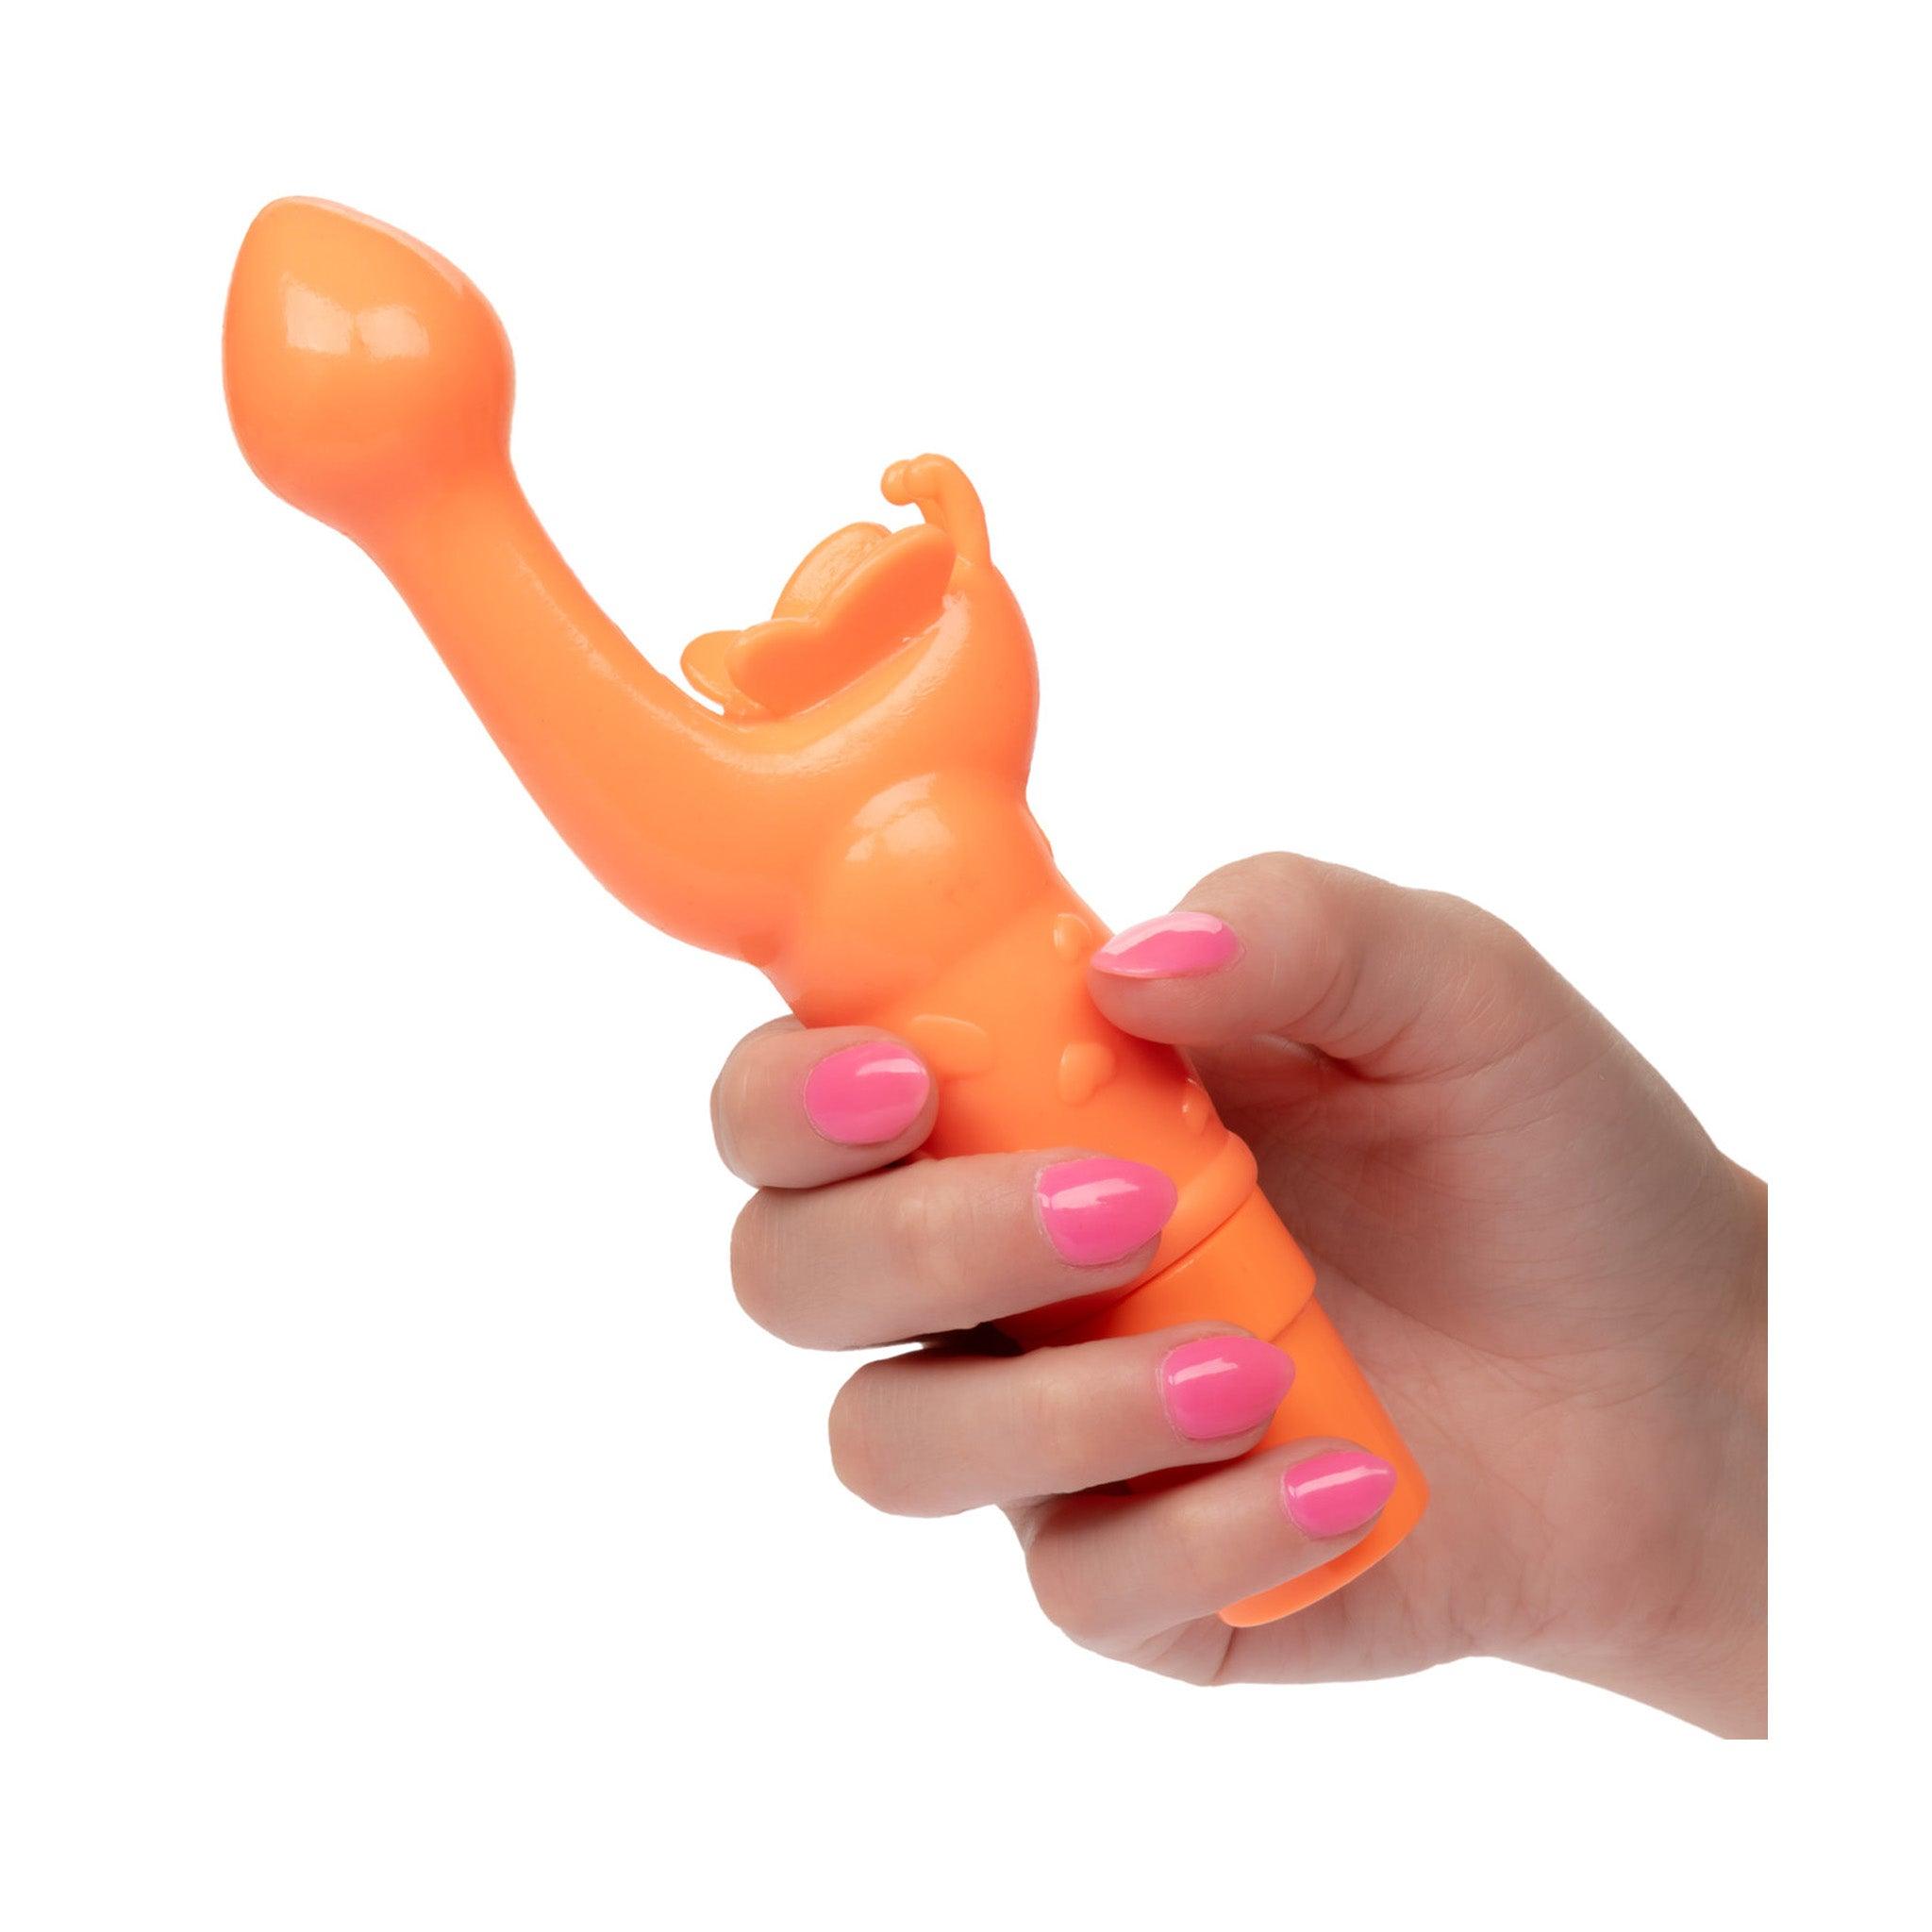 Rechargeable Butterfly Kiss Vibrating and Fluttering - Orange - CheapLubes.com